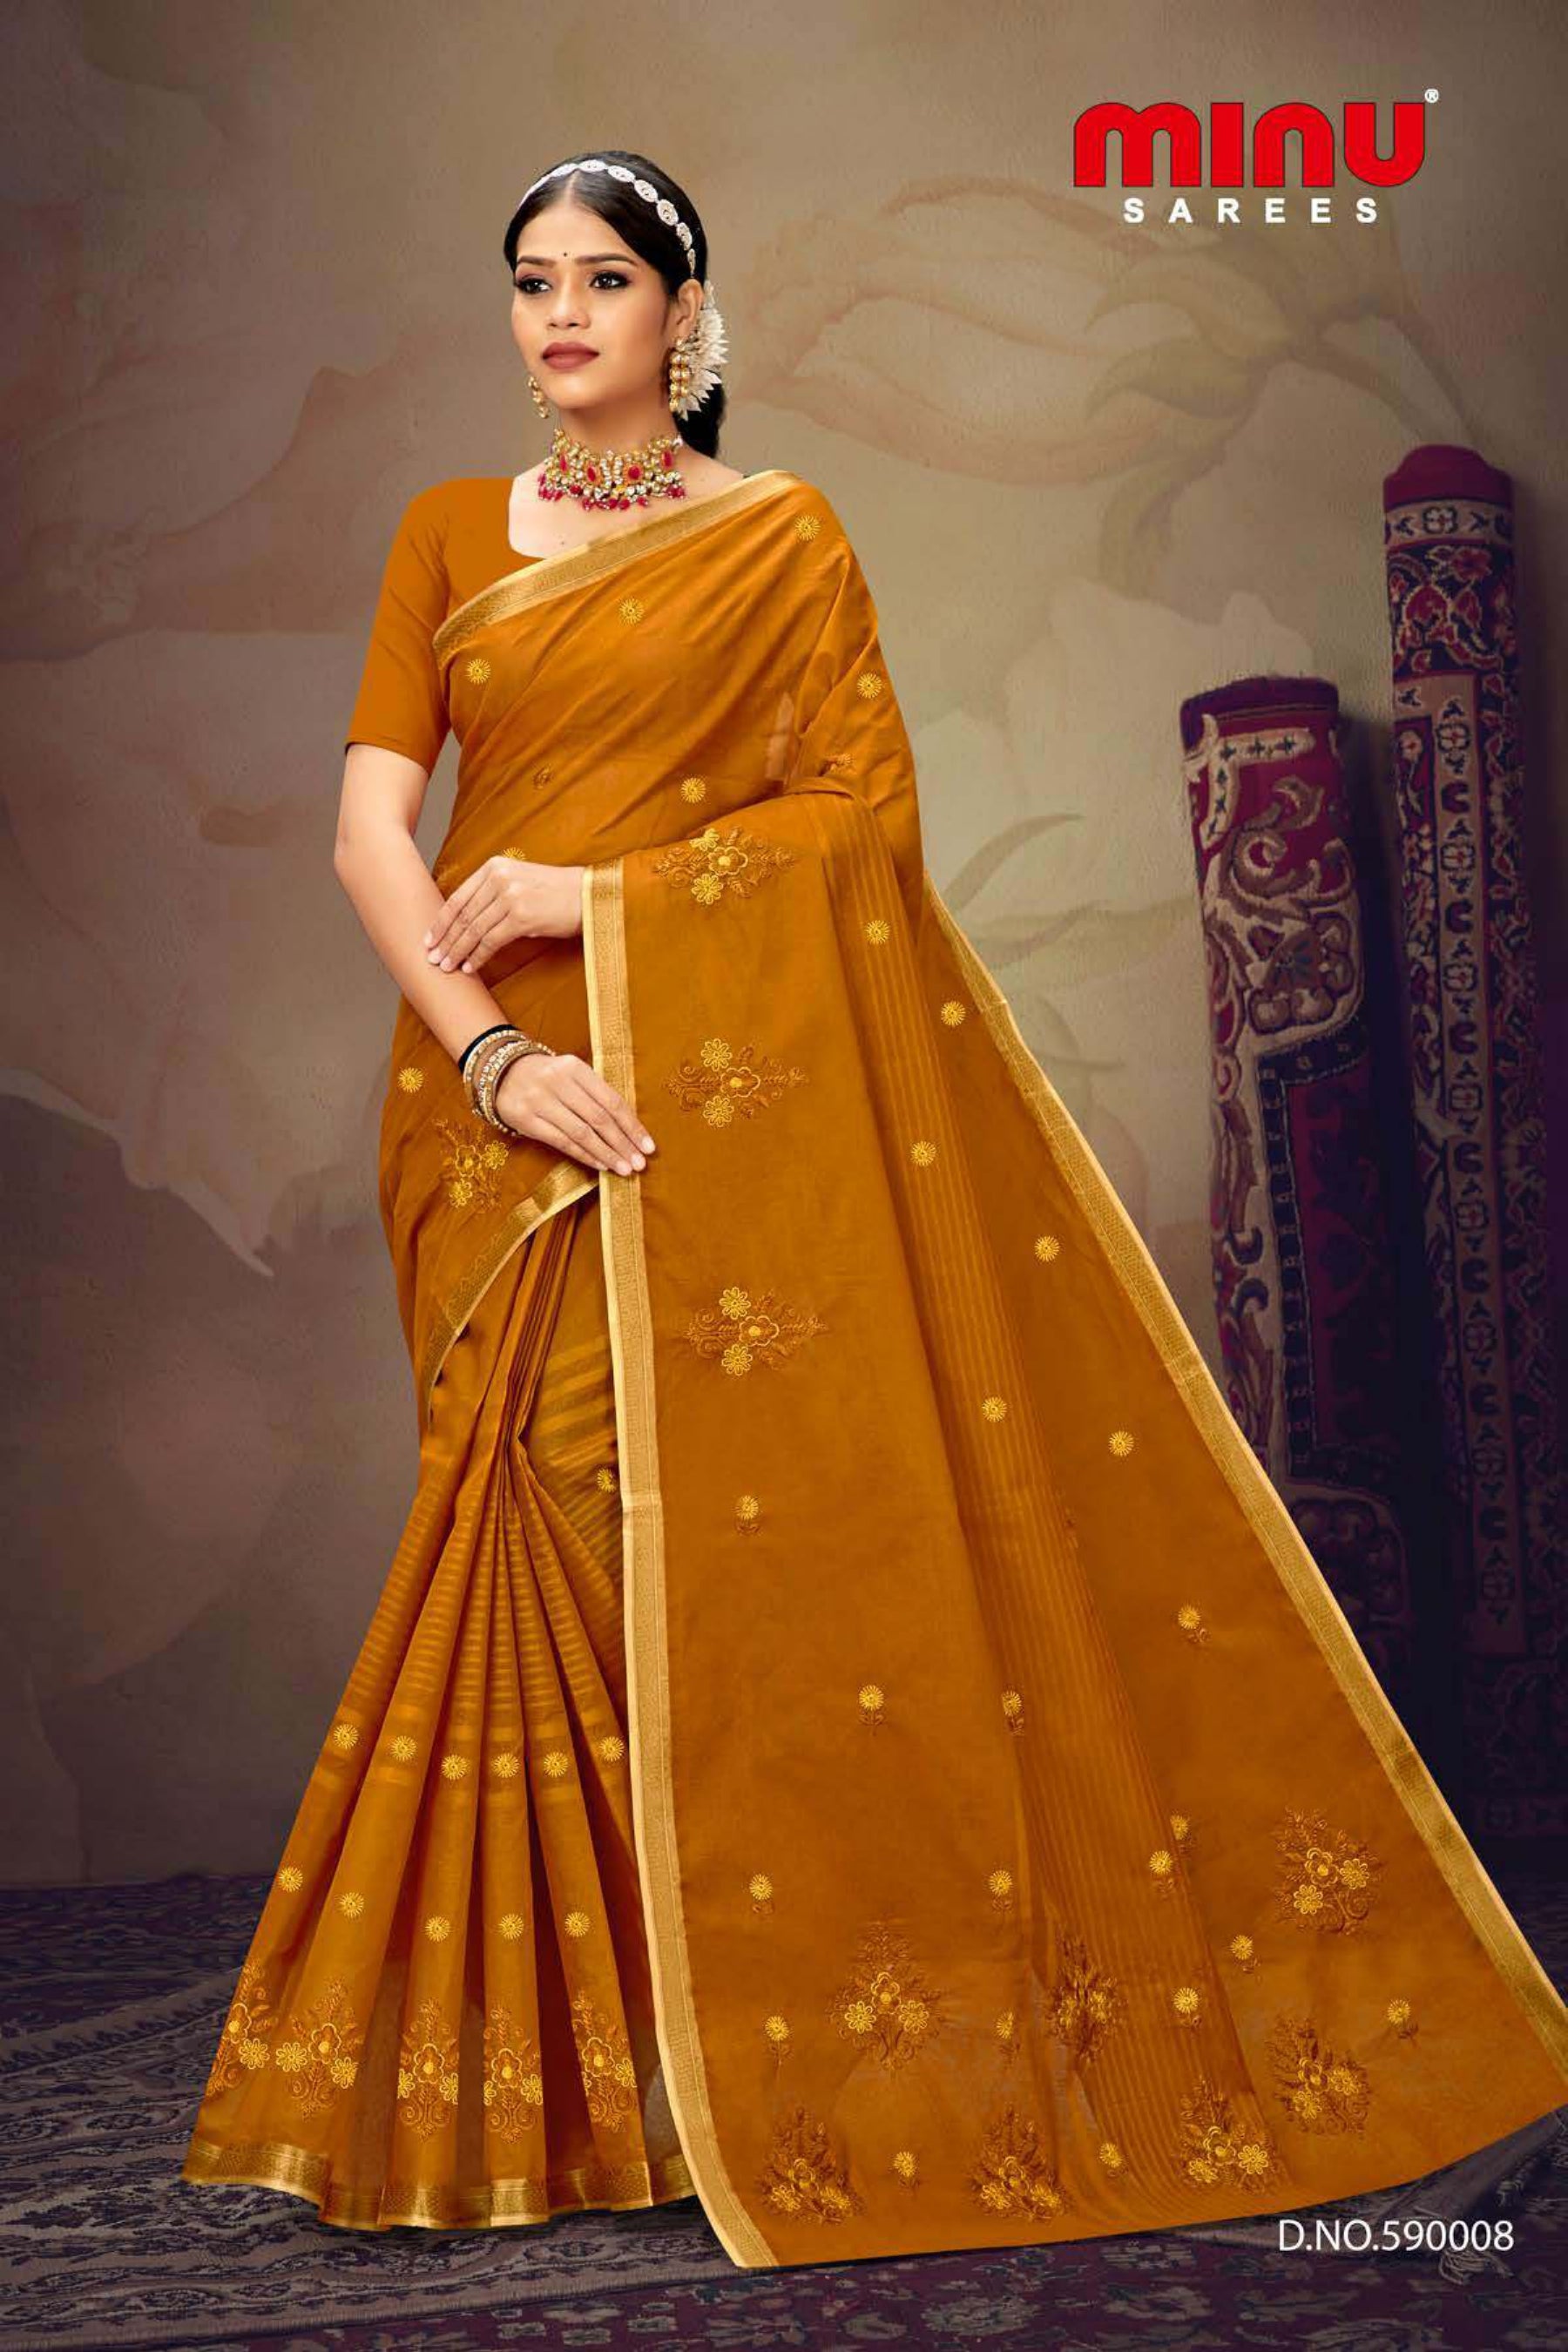 embroidered saree wearing woman